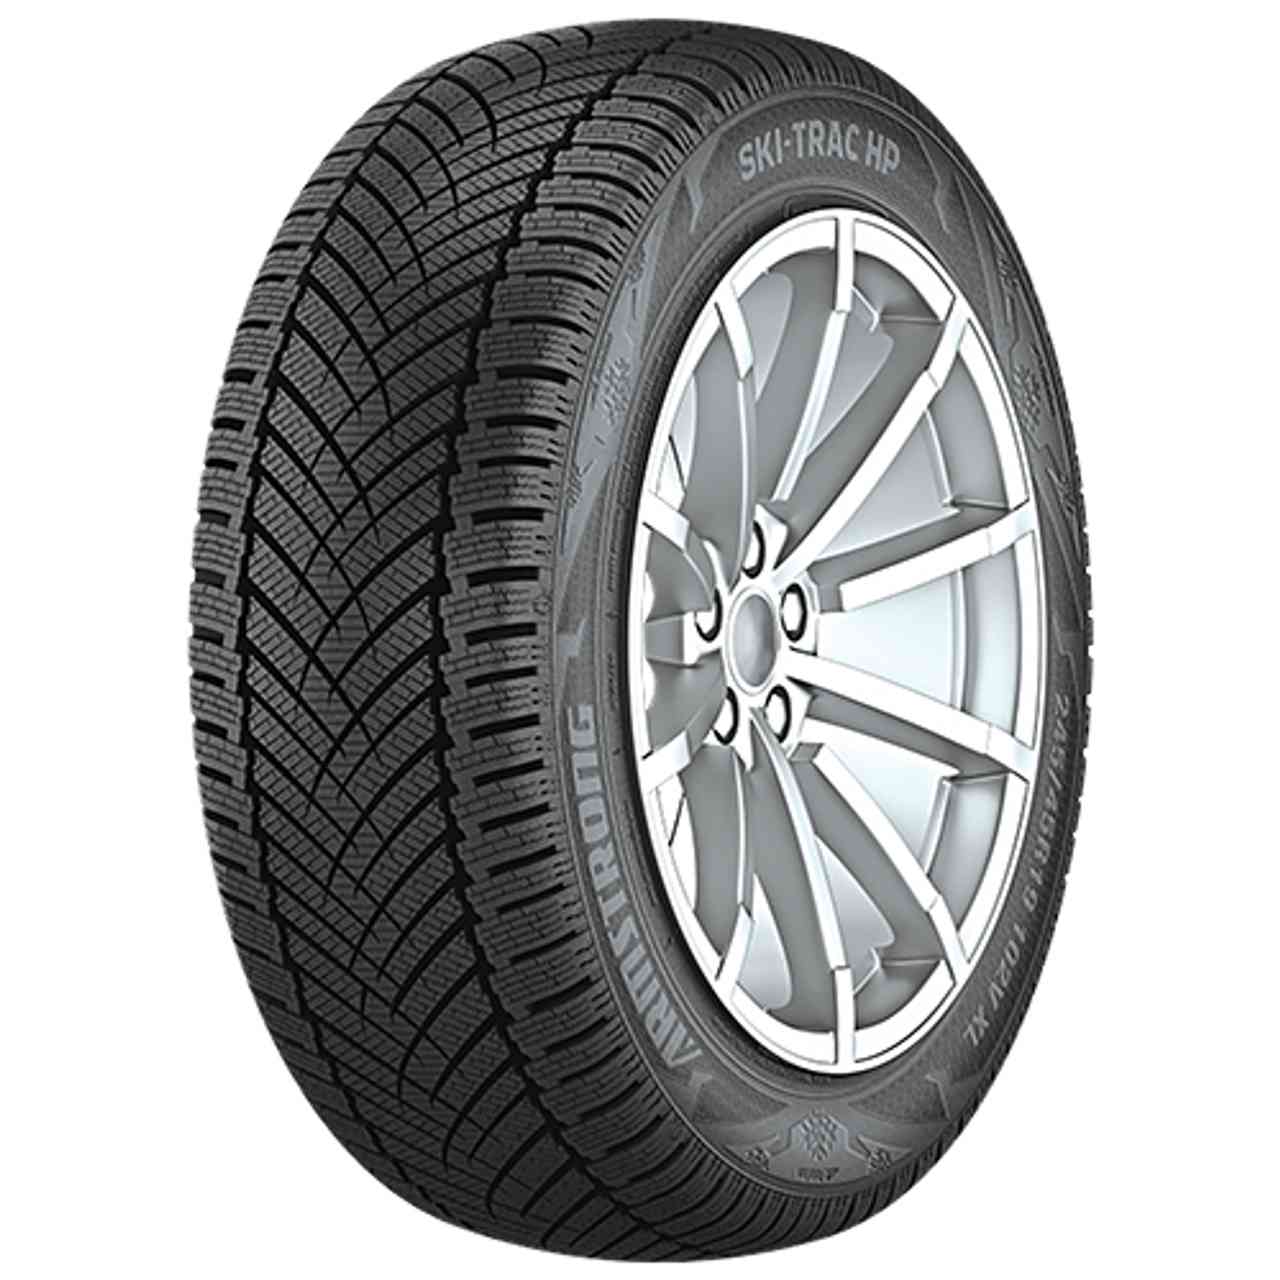 ARMSTRONG SKI-TRAC HP 225/40R18 92V BSW von Armstrong